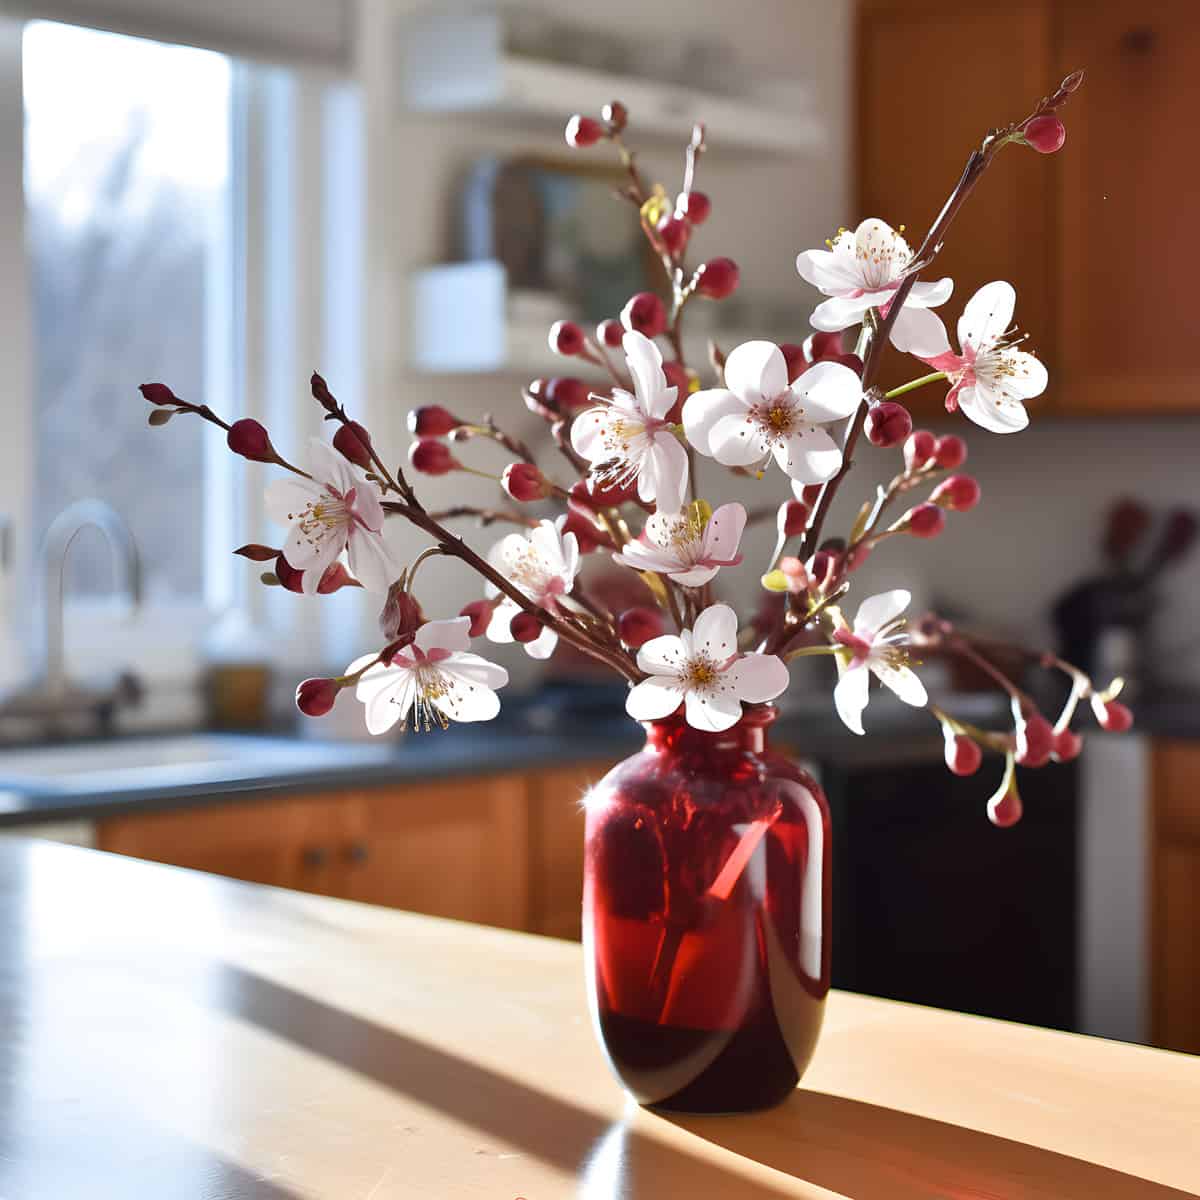 Canadian Serviceberry on a kitchen counter